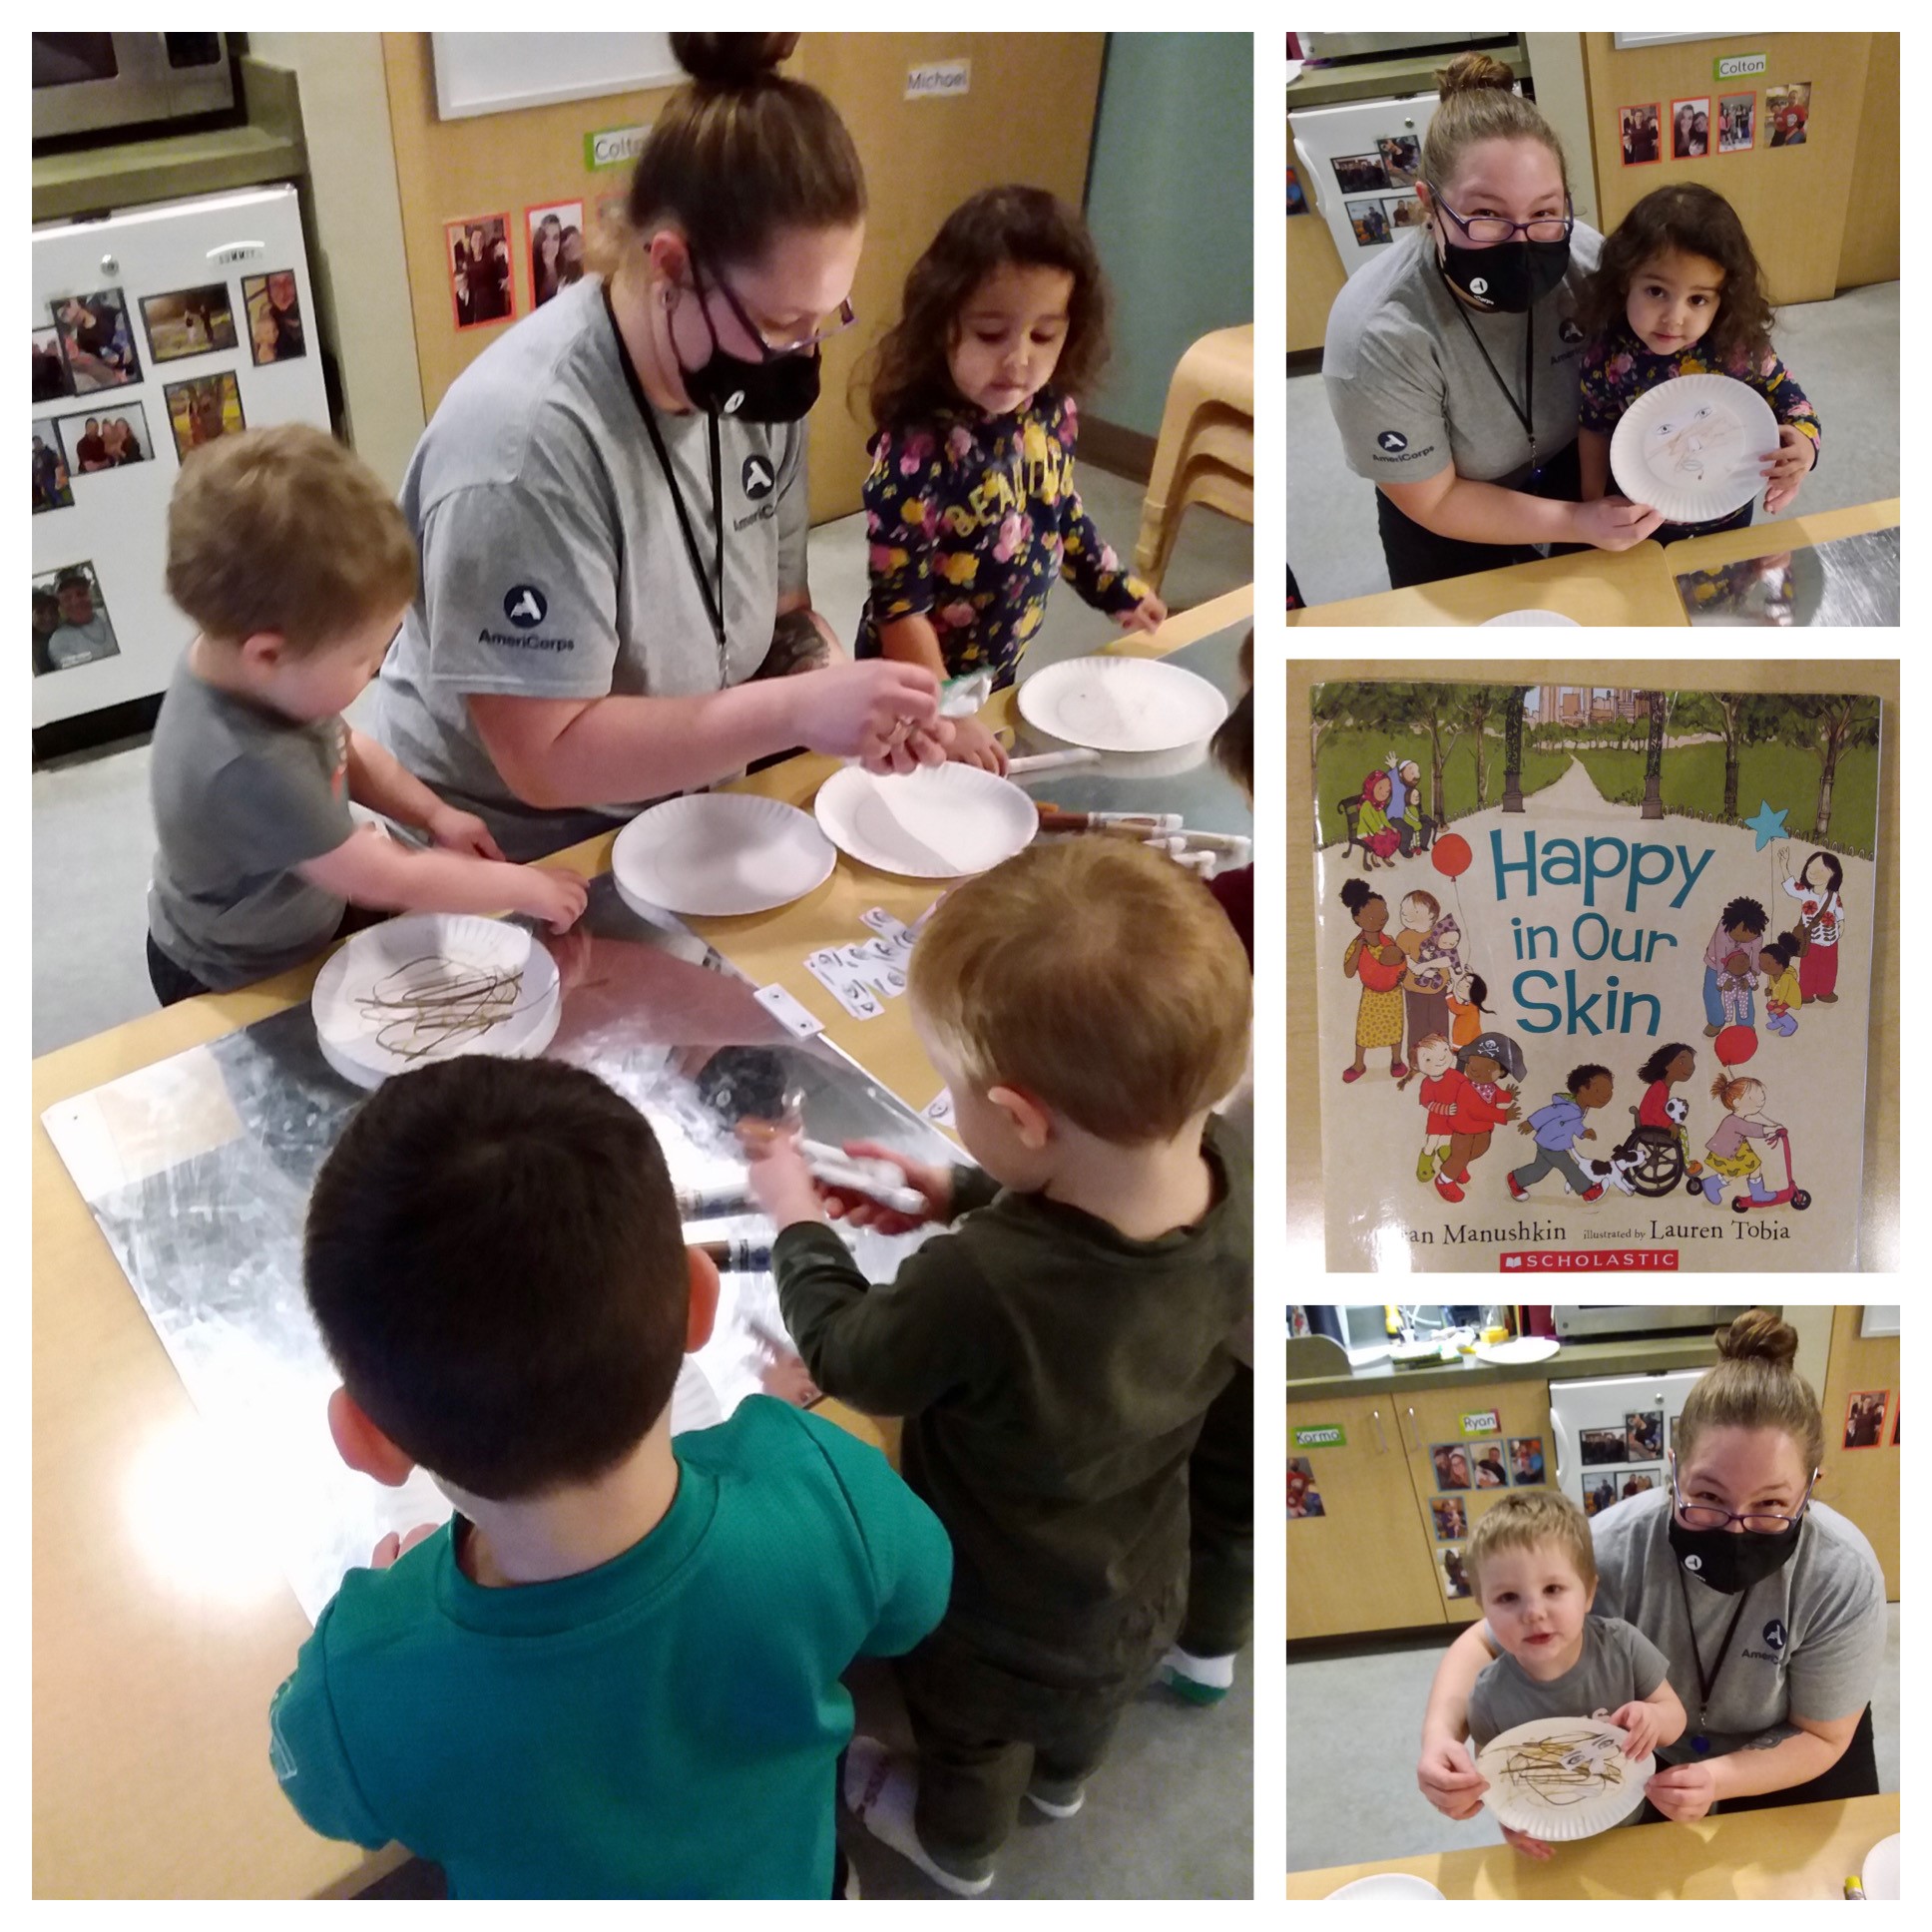 Collage of images featuring a teacher and toddlers in a classroom